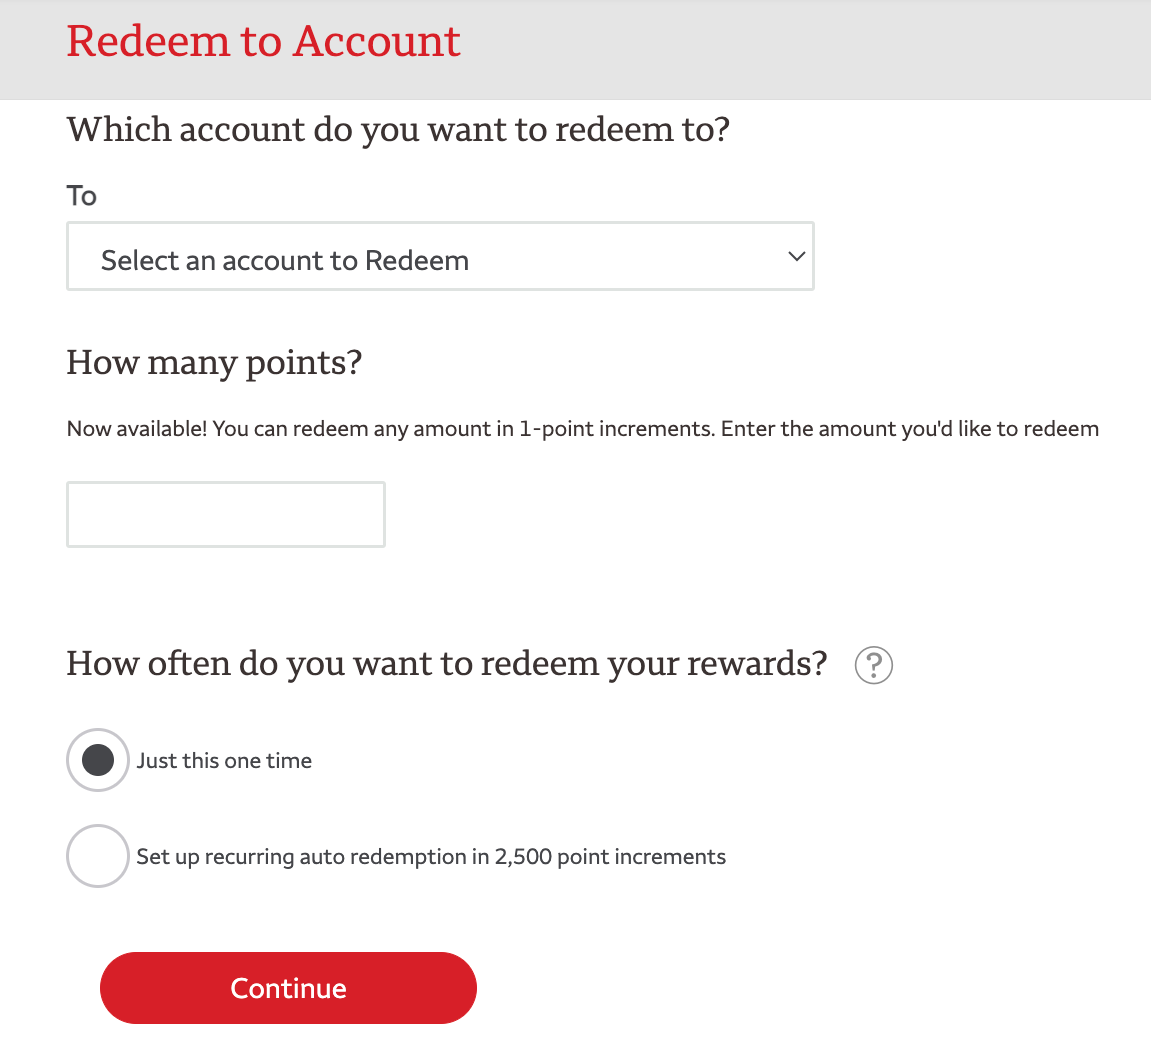 Wells Fargo redeem points to account or check